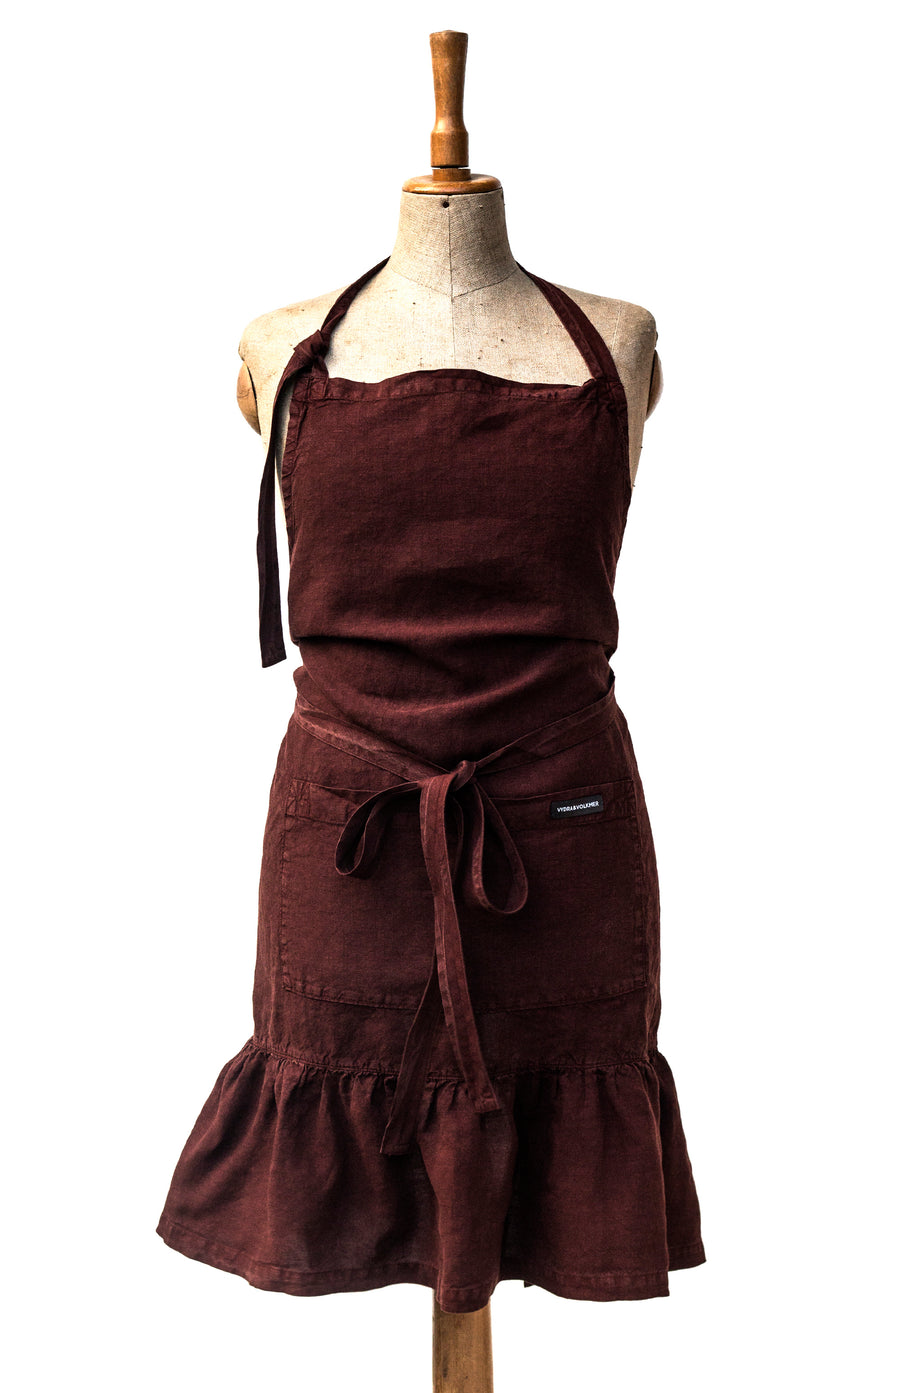 Linen apron with canister in the shade of Rum Raisin